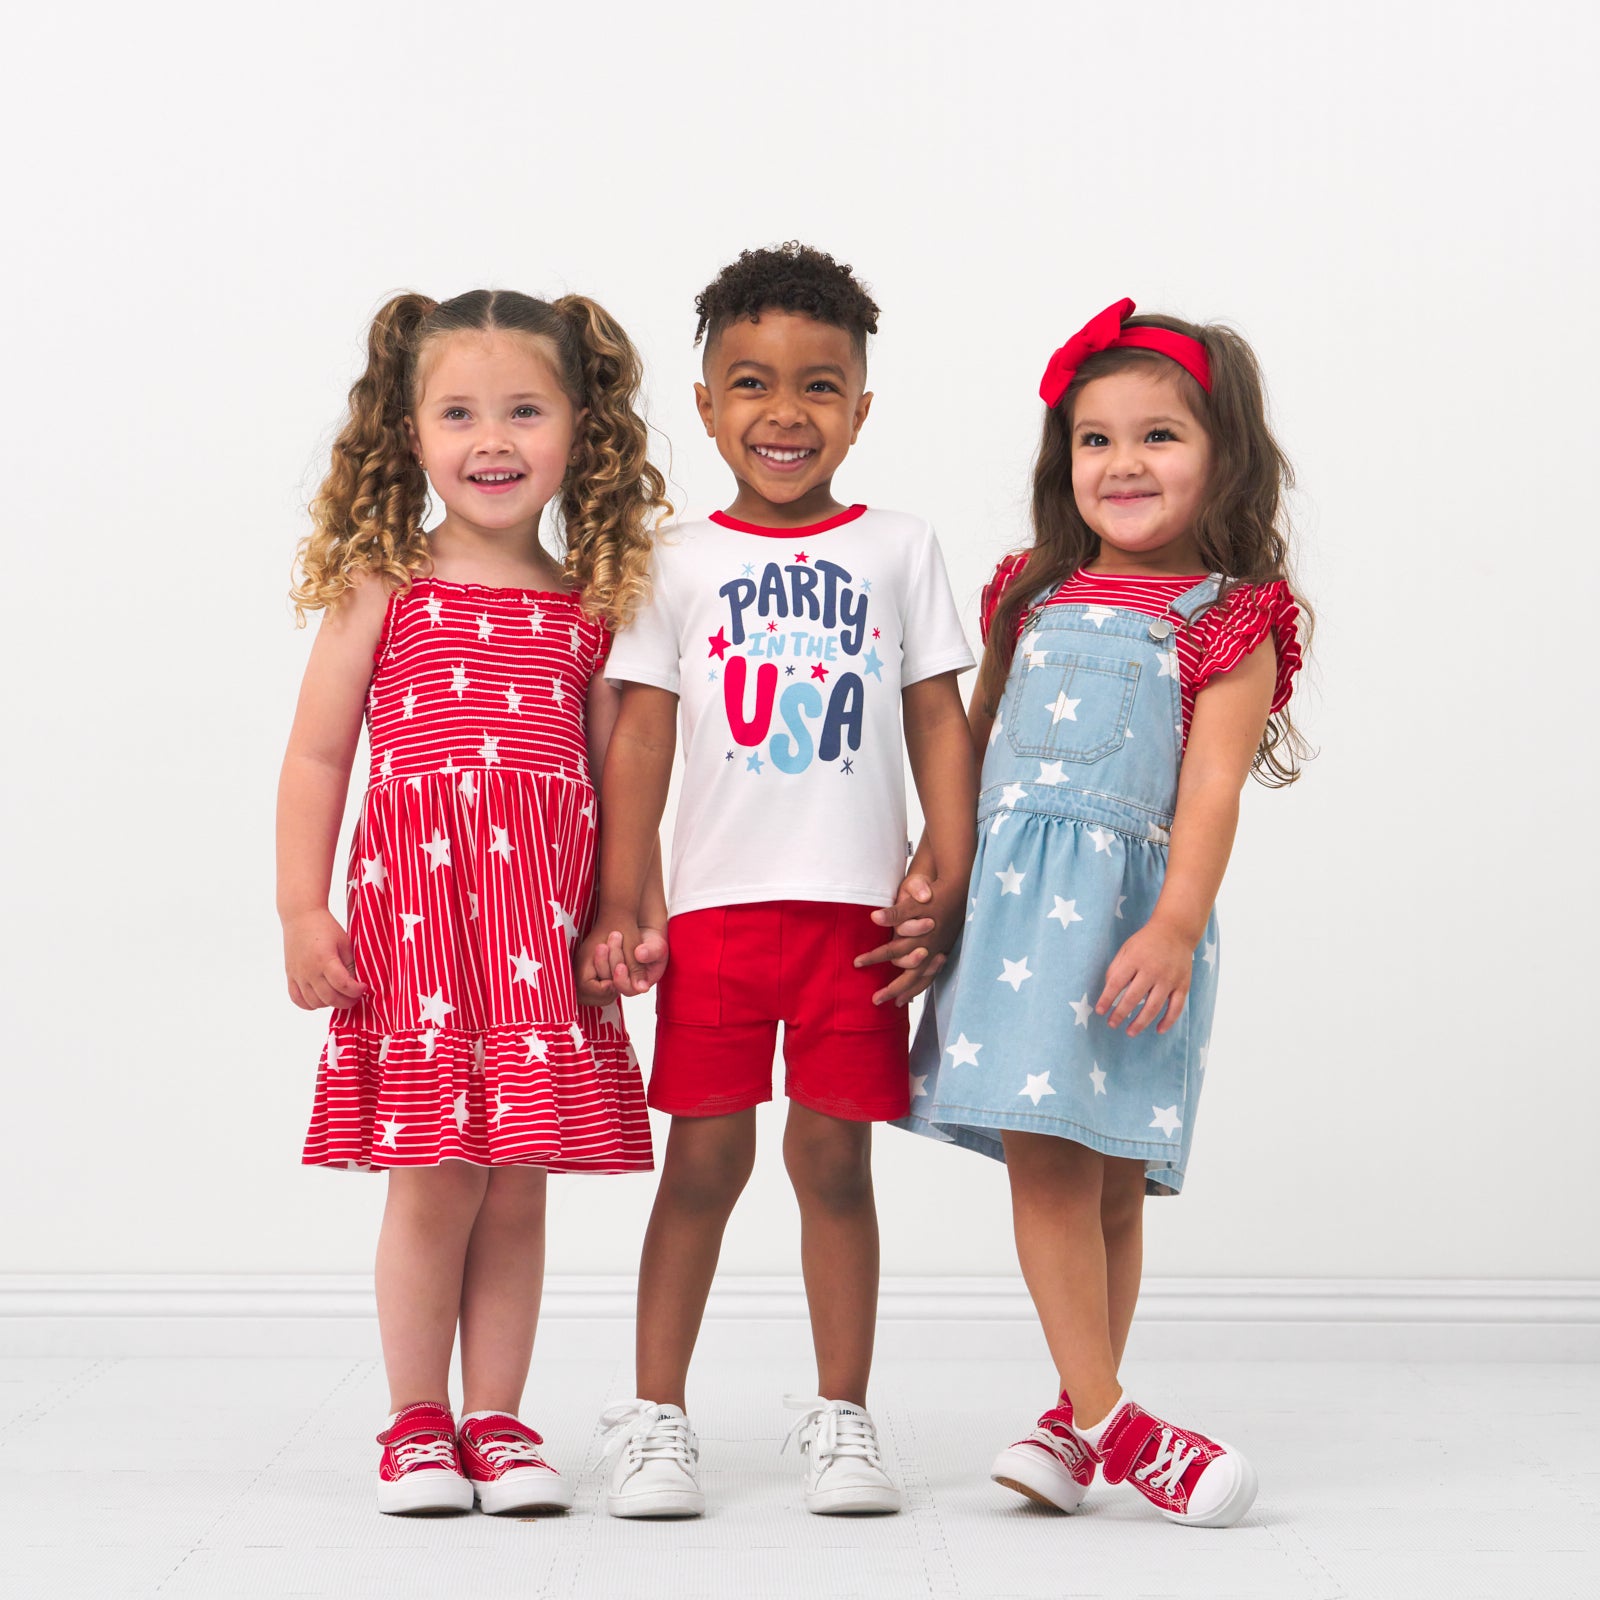 Three children holding hands wearing coordinating 4th of July Play outfits